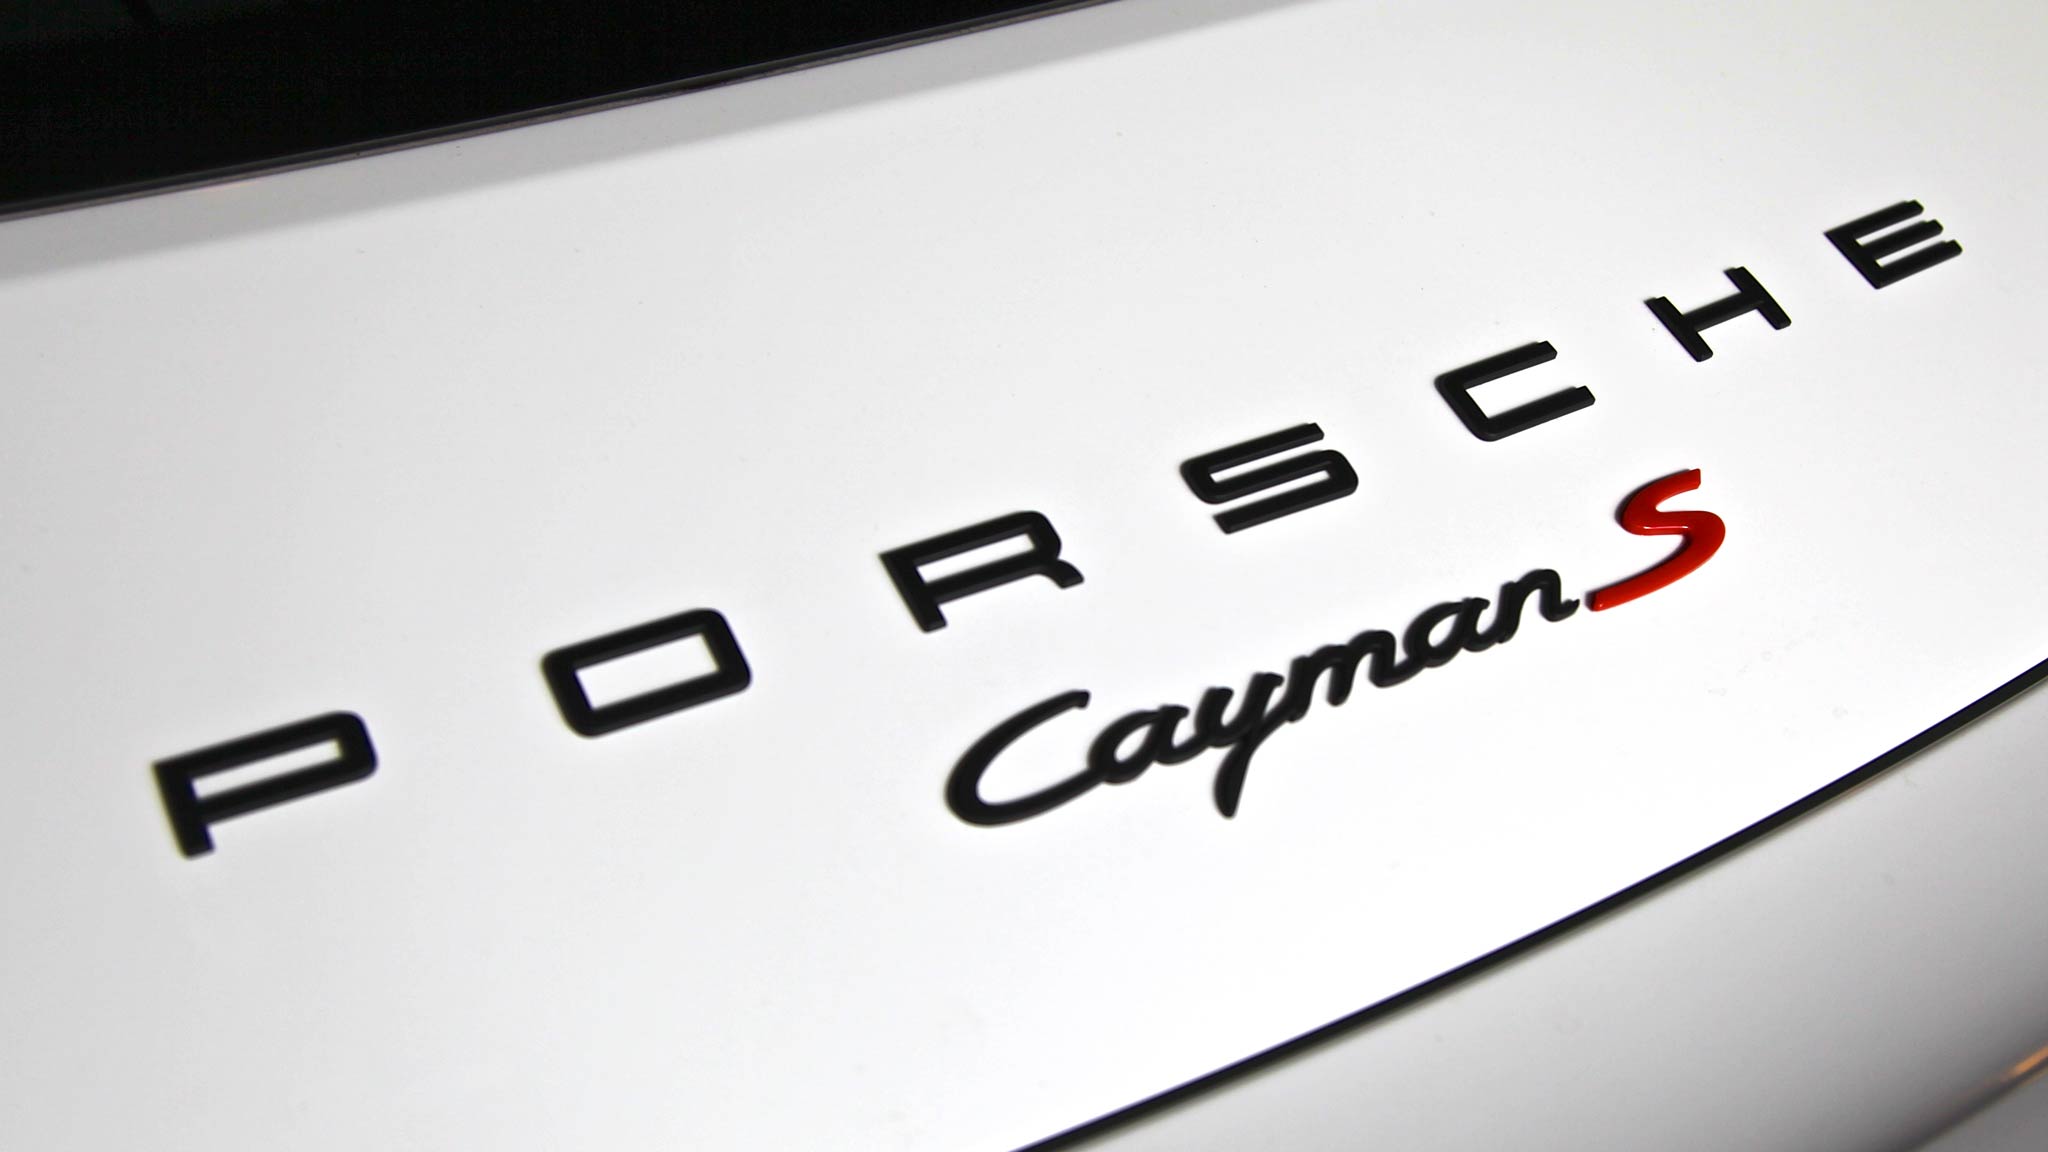 Caymans S Re-Badged, Close Up